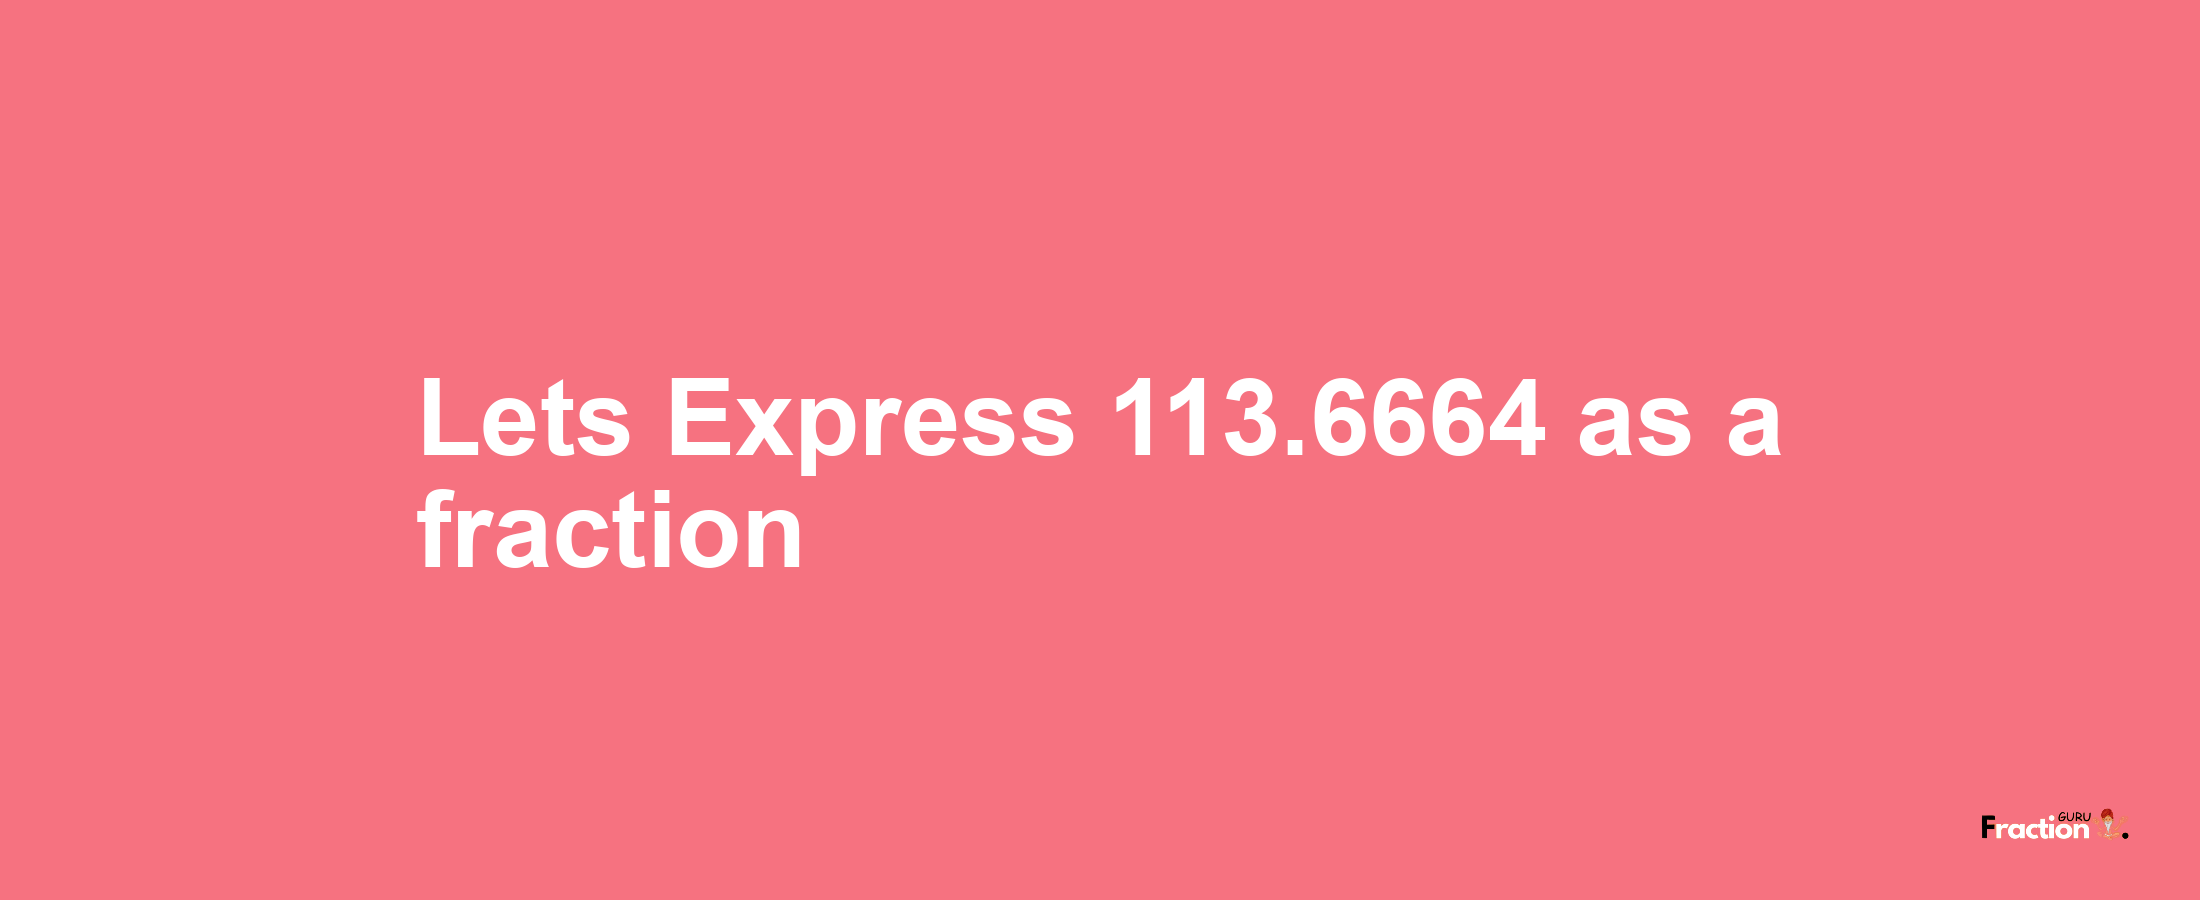 Lets Express 113.6664 as afraction